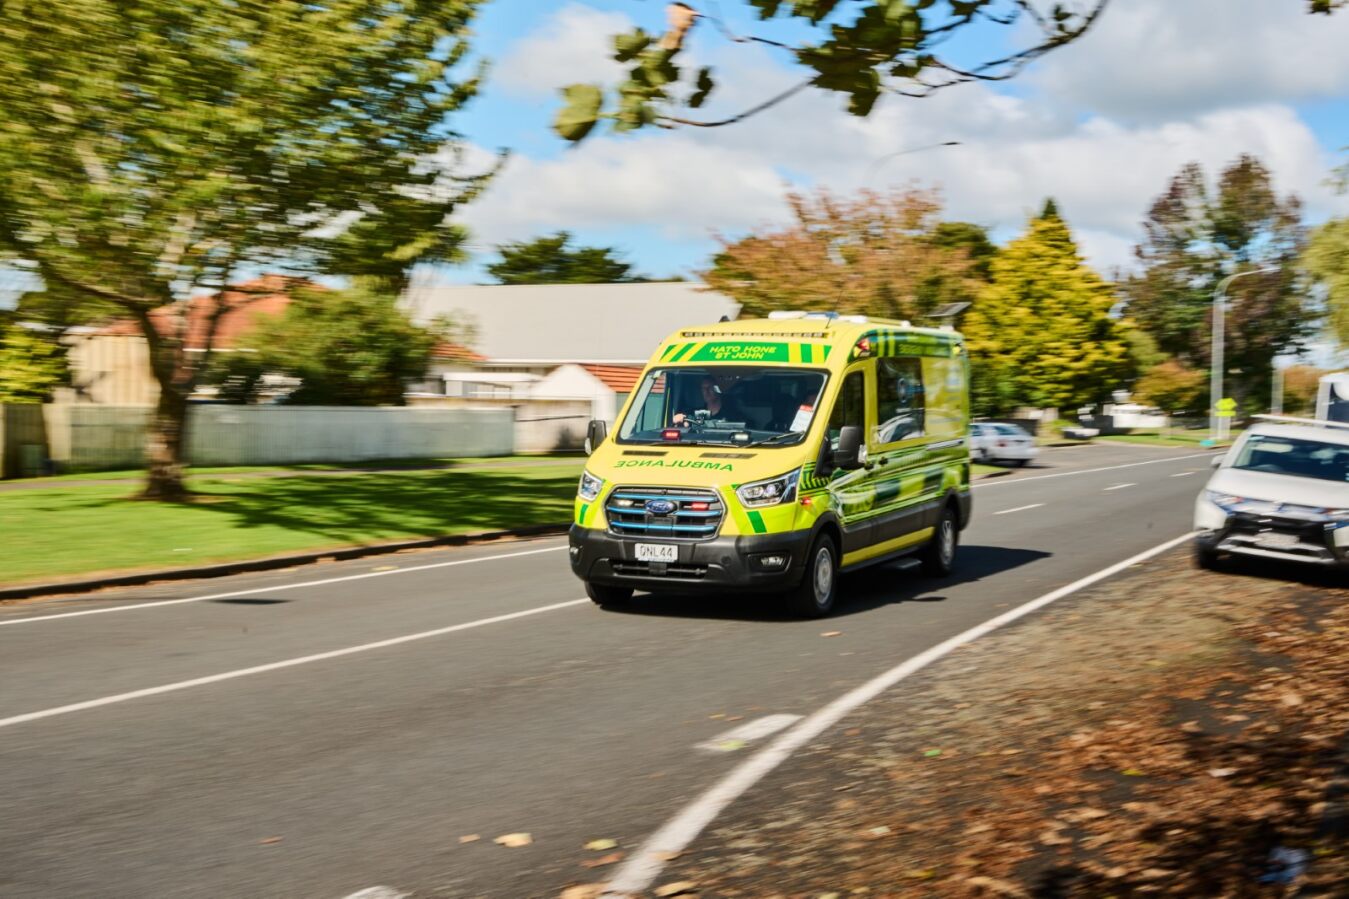 Hato Hone St John's new electric emergency ambulance driving on a road past a green tree in New Zealand